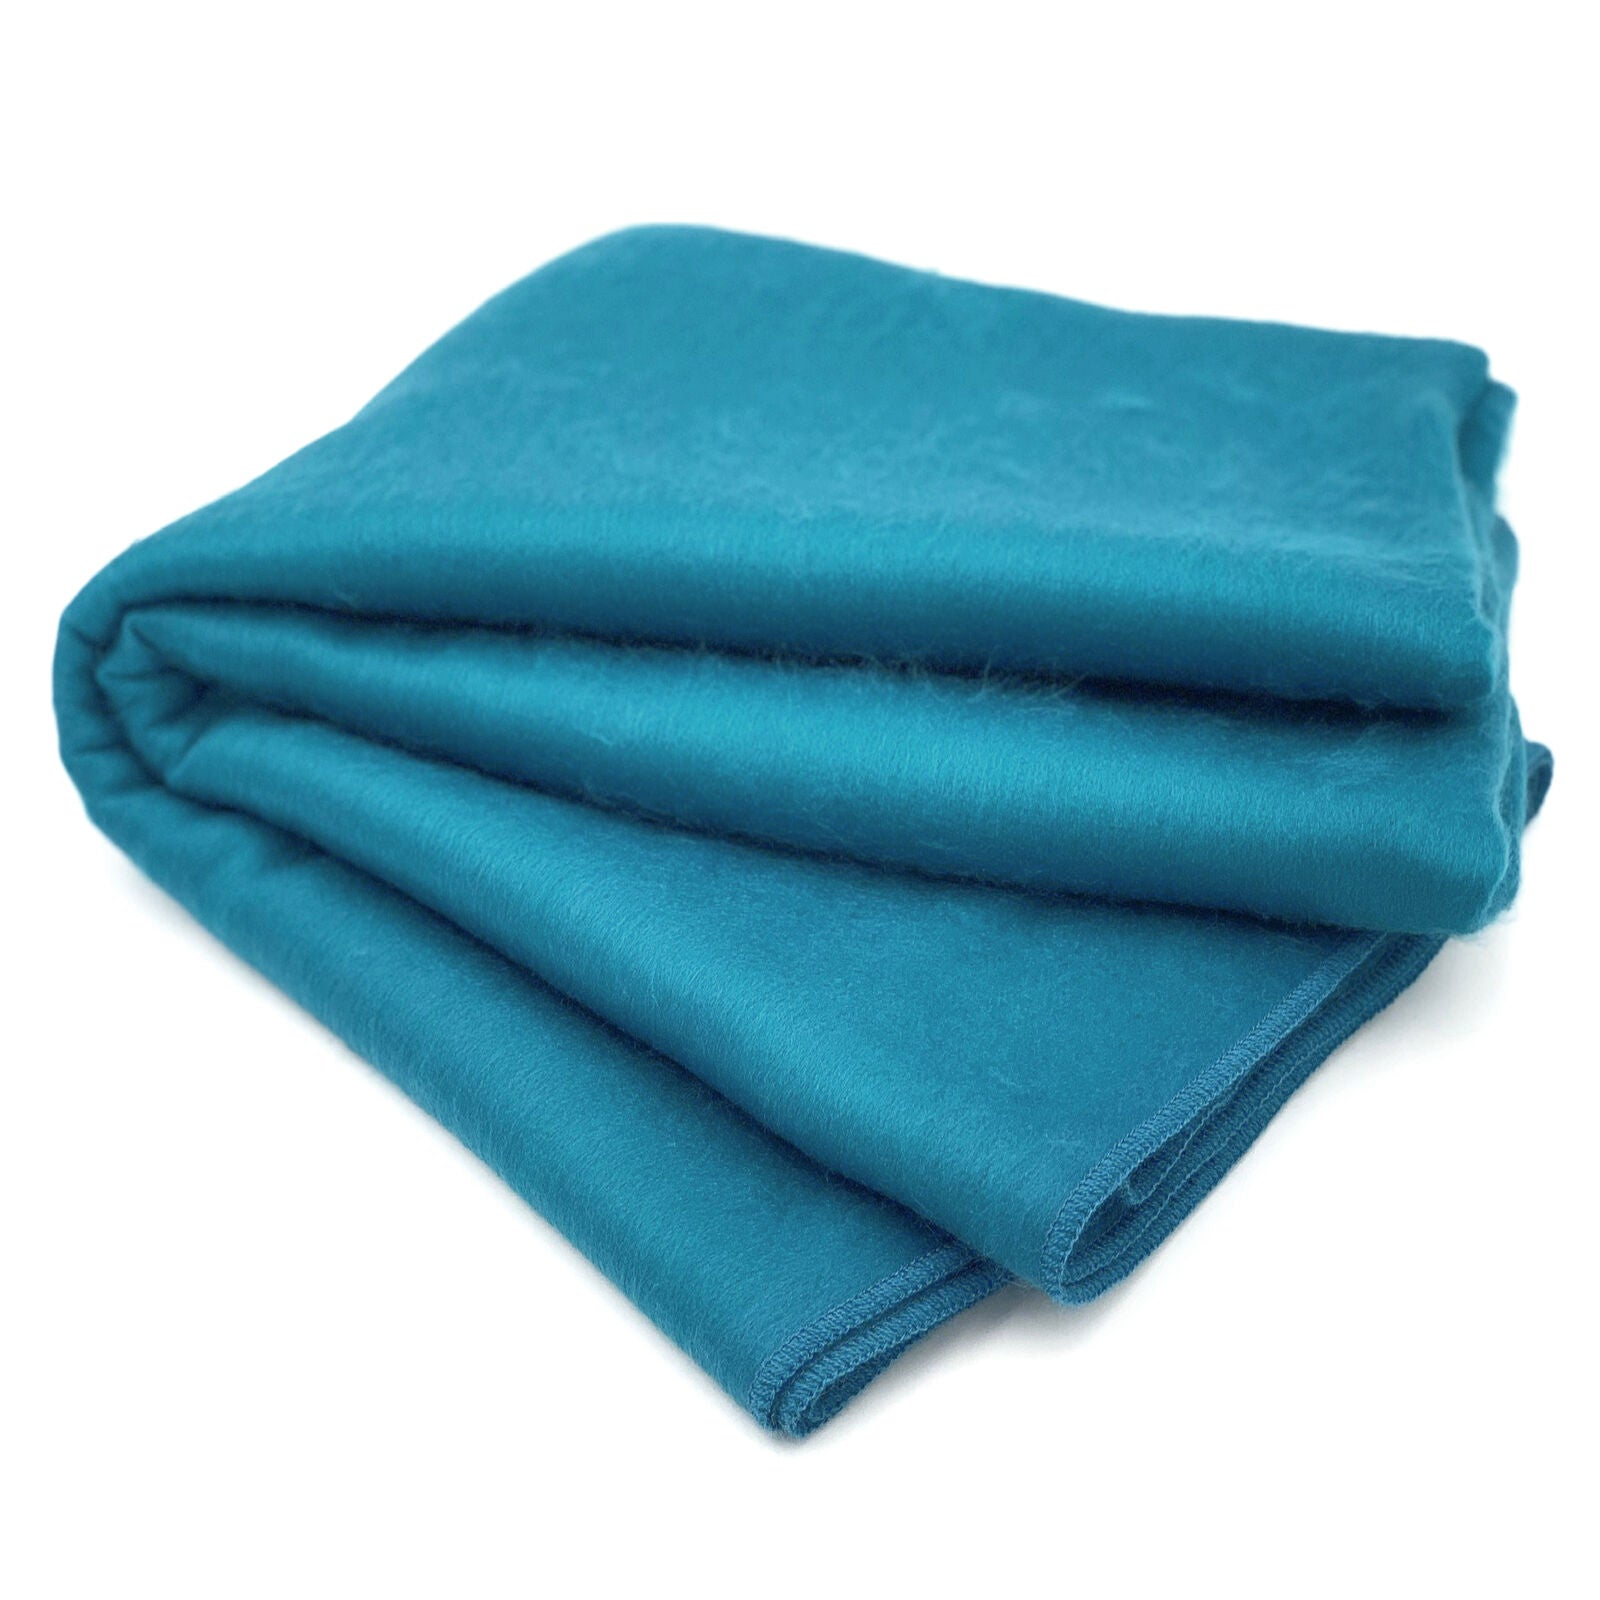 Moyaschucho - Baby Alpaca Wool Throw Blanket / Sofa Cover - Queen 90" x 65" - solid pattern teal/turquoise/blue/cyan